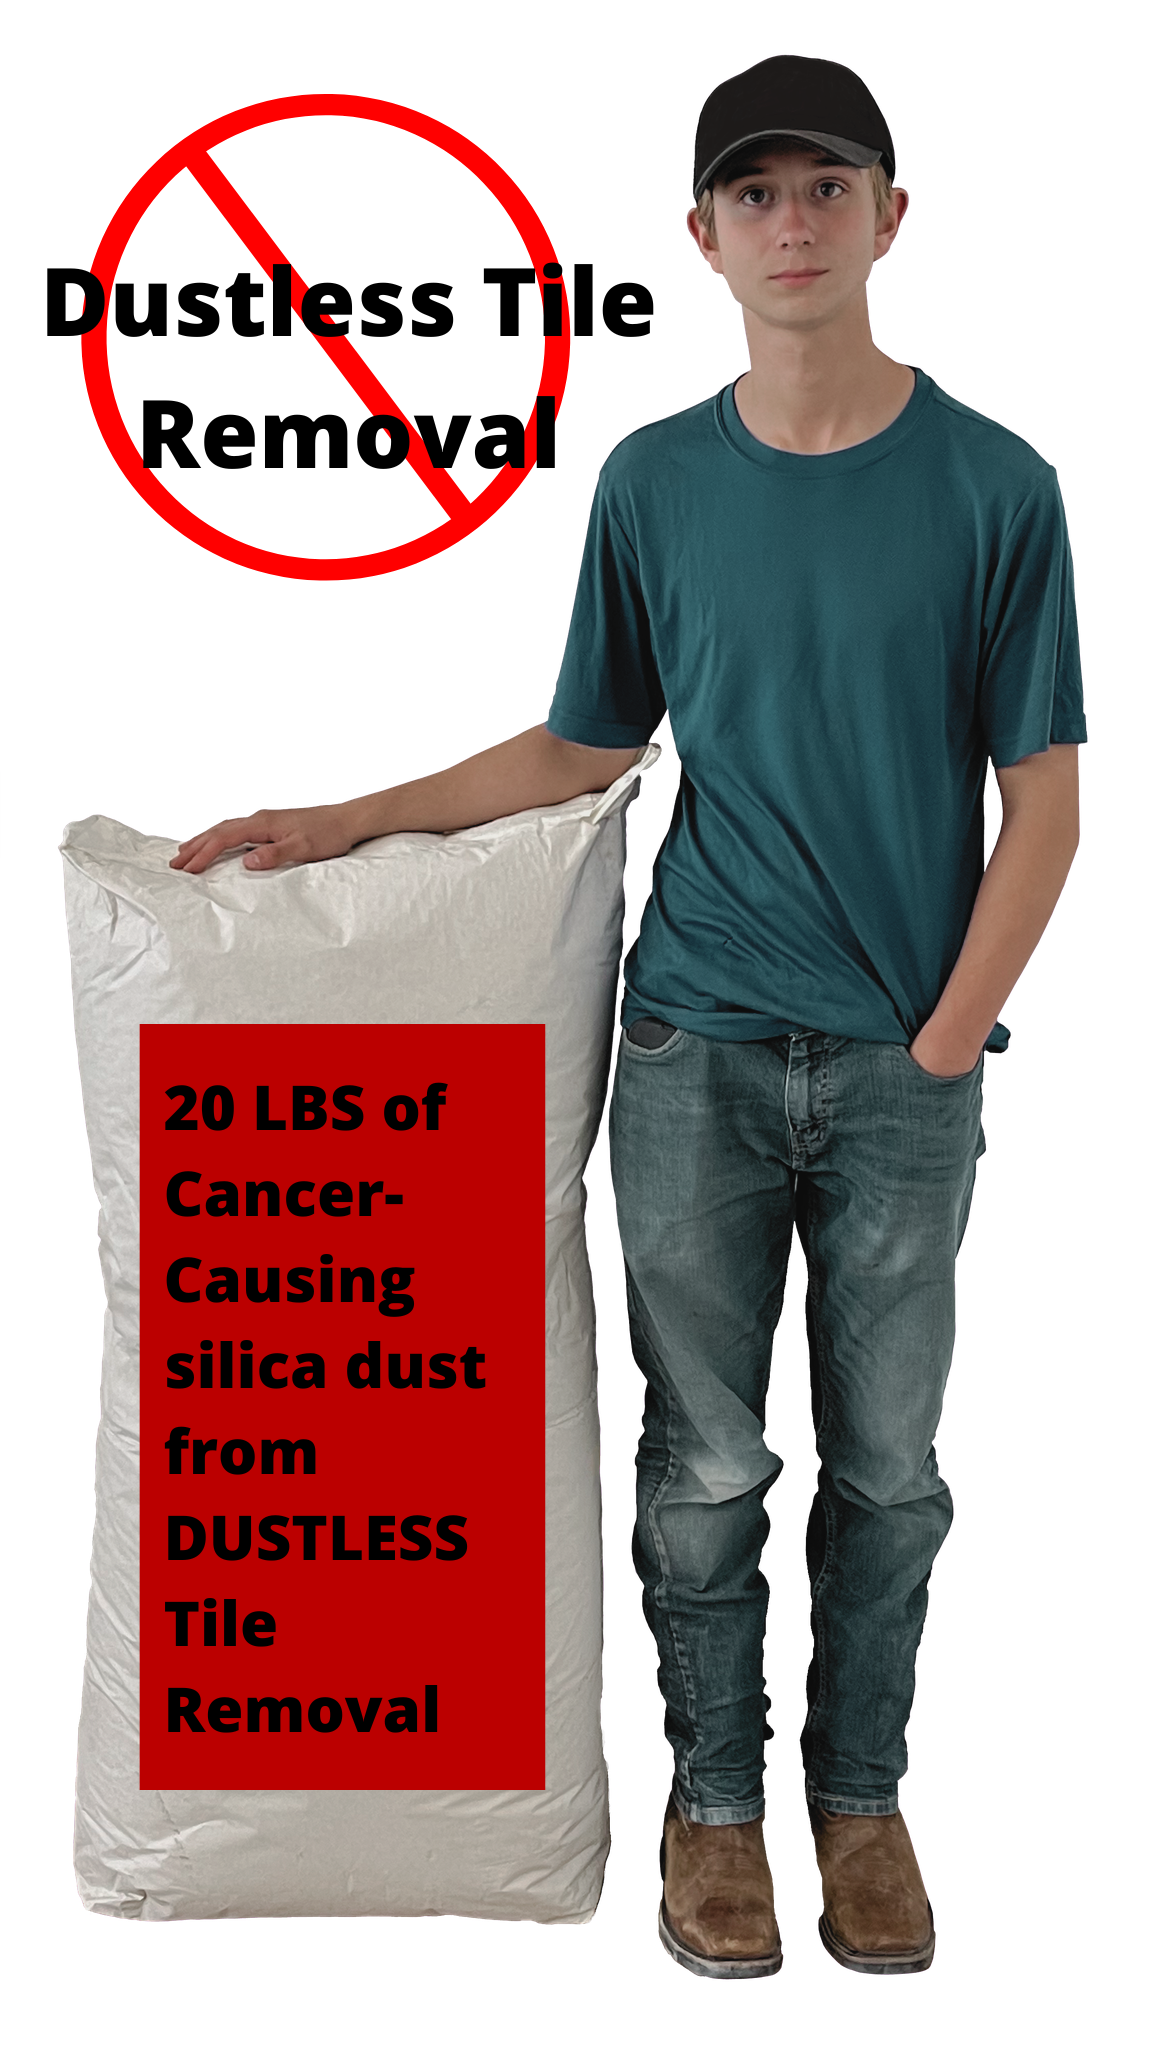 20 LBS of Cancer-Causing Silica Dust from Dustless Tile Removal